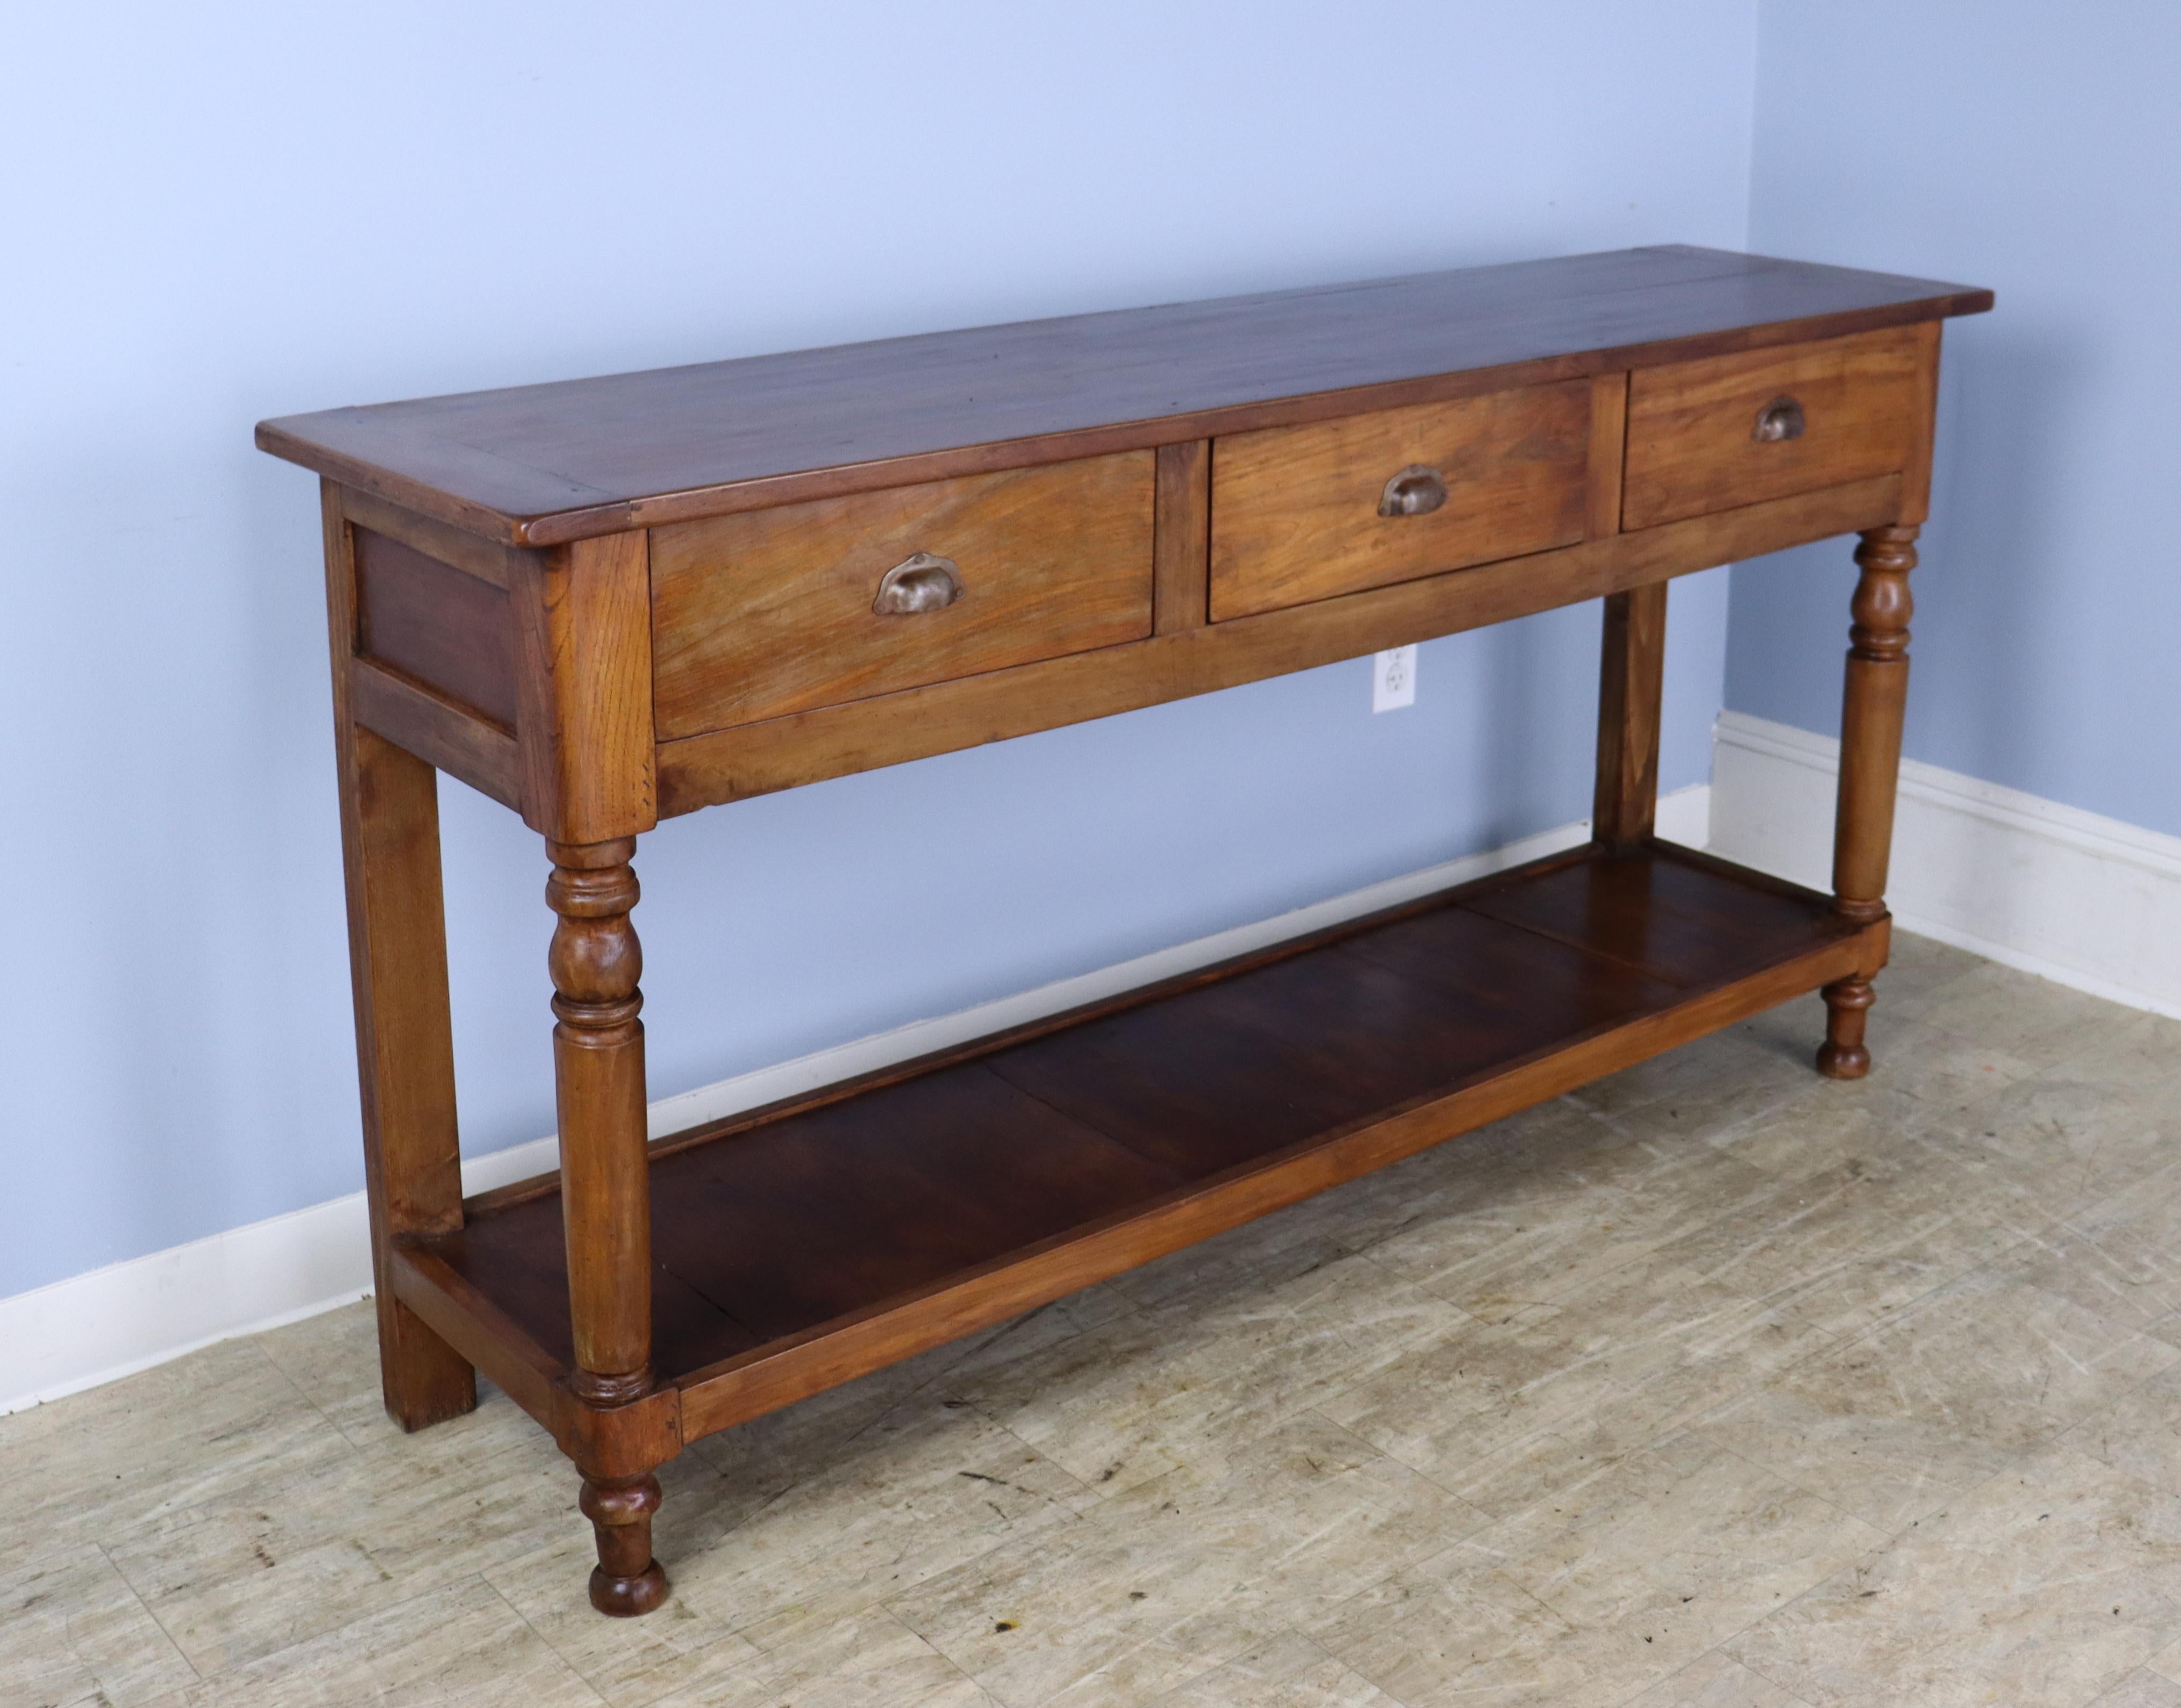 A lovely walnut potboard server, custom made for Briggs House in France with old legs, circa 1850. Generously proportioned with a thick top, three roomy drawers, and vivid walnut color. There is some distress on the old wood used in making the